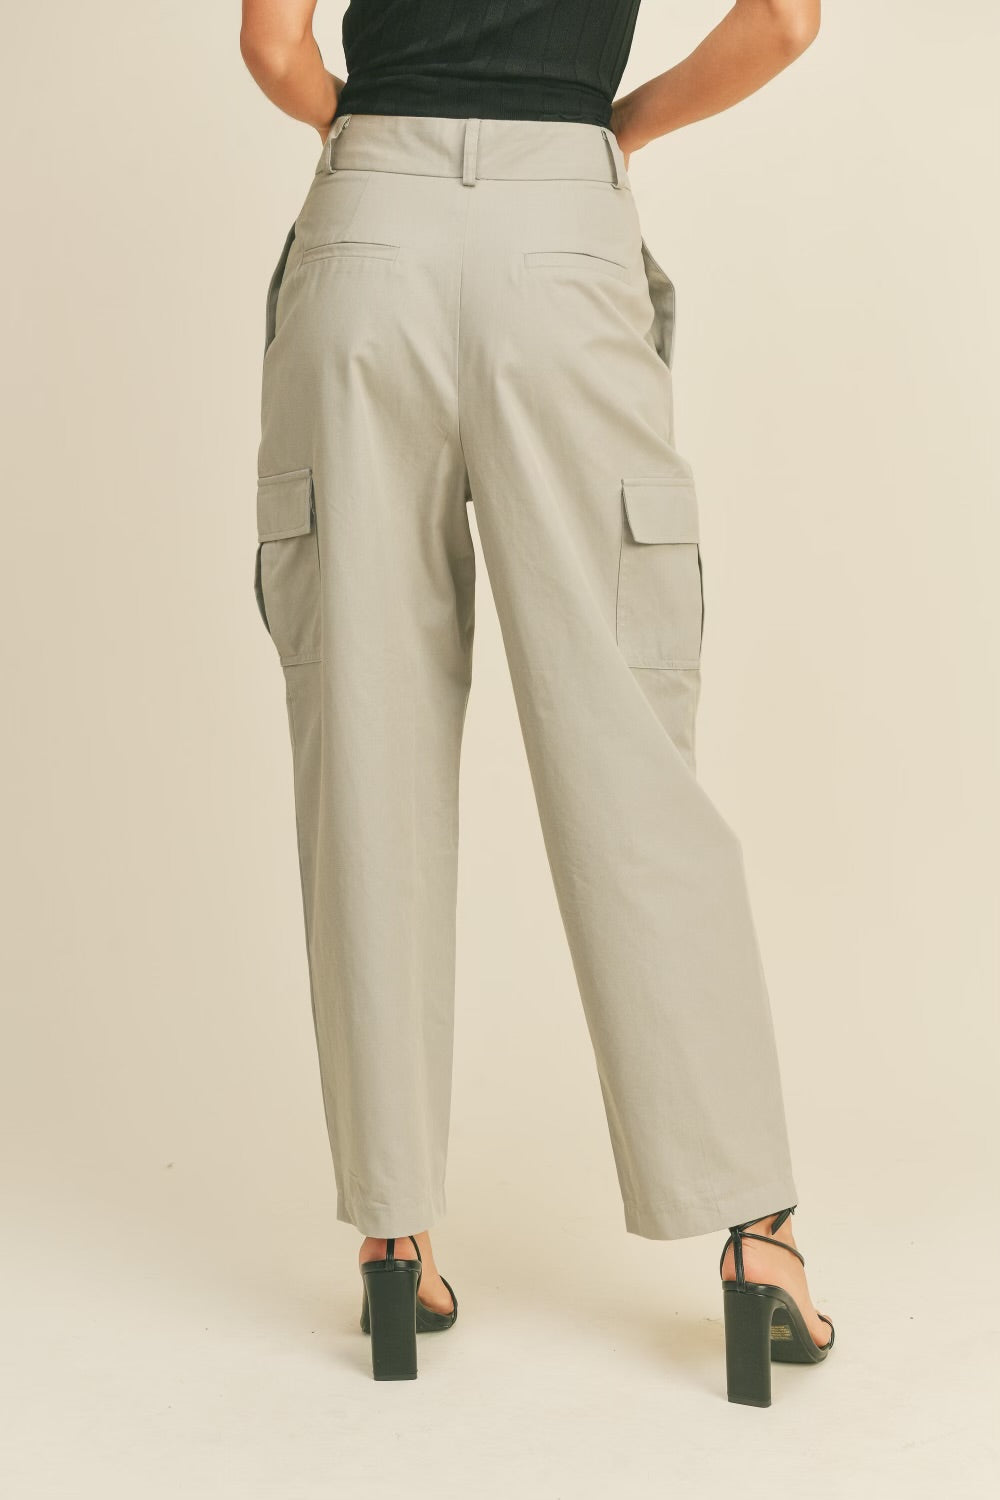 A model wearing a beige high rise cargo pants backside view against a tan wall. 